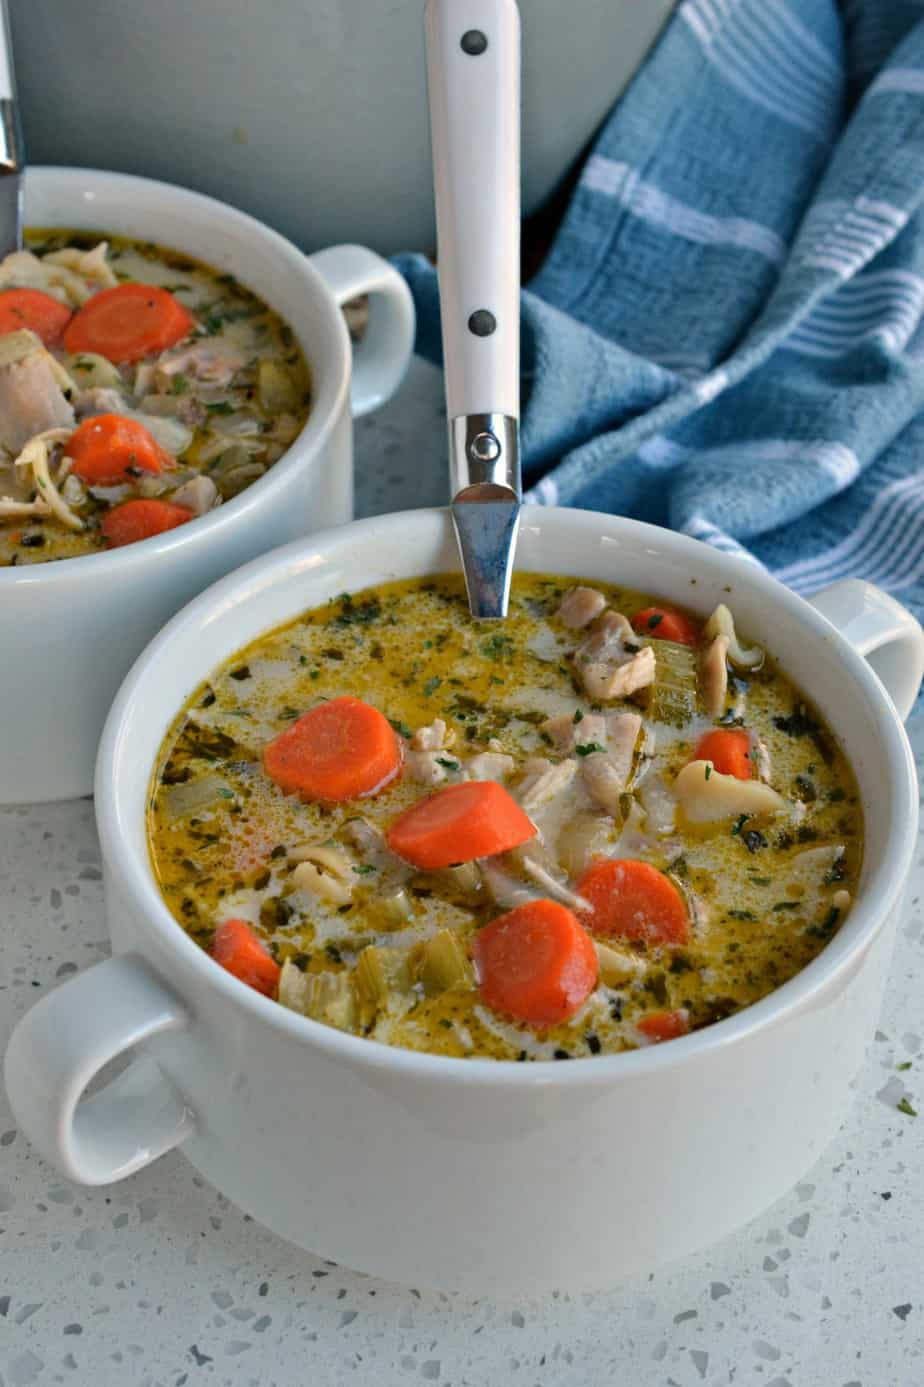 Satisfy your chicken noodle soup craving with this easy 30-minute recipe.